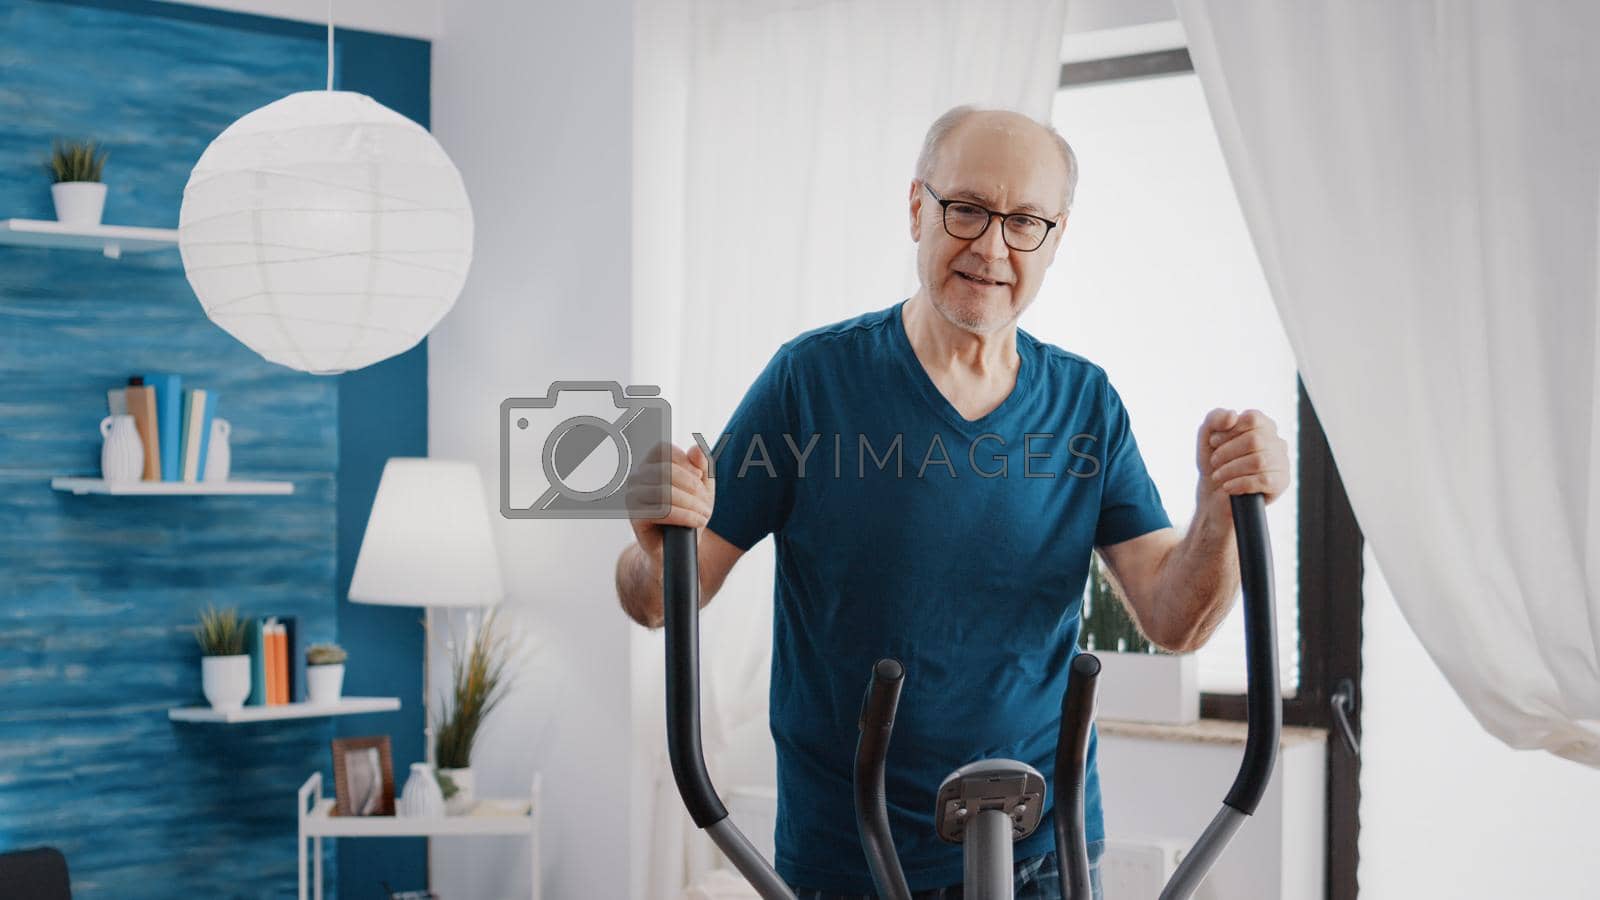 Elder adult doing physical cardio exercise on fitness bicycle. Aged man using electric stationary bike to do workout training at home. Old person with sport equipment to be in shape.